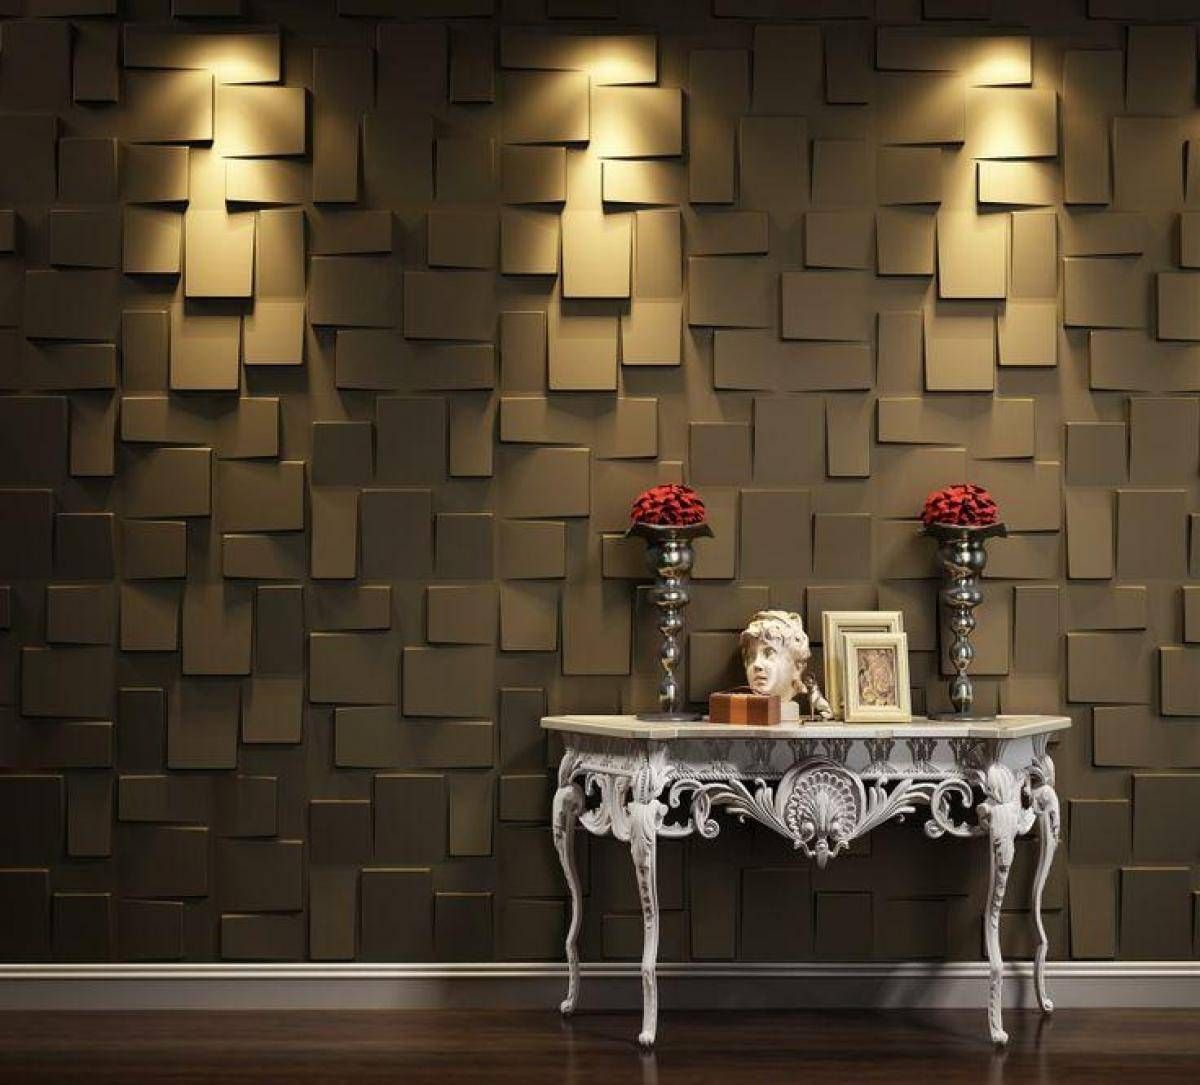 Smartness Design Wall Paneling Design 3d Wall Panels Interior 71 Intended For Latest 3d Wall Covering Panels (Gallery 20 of 20)